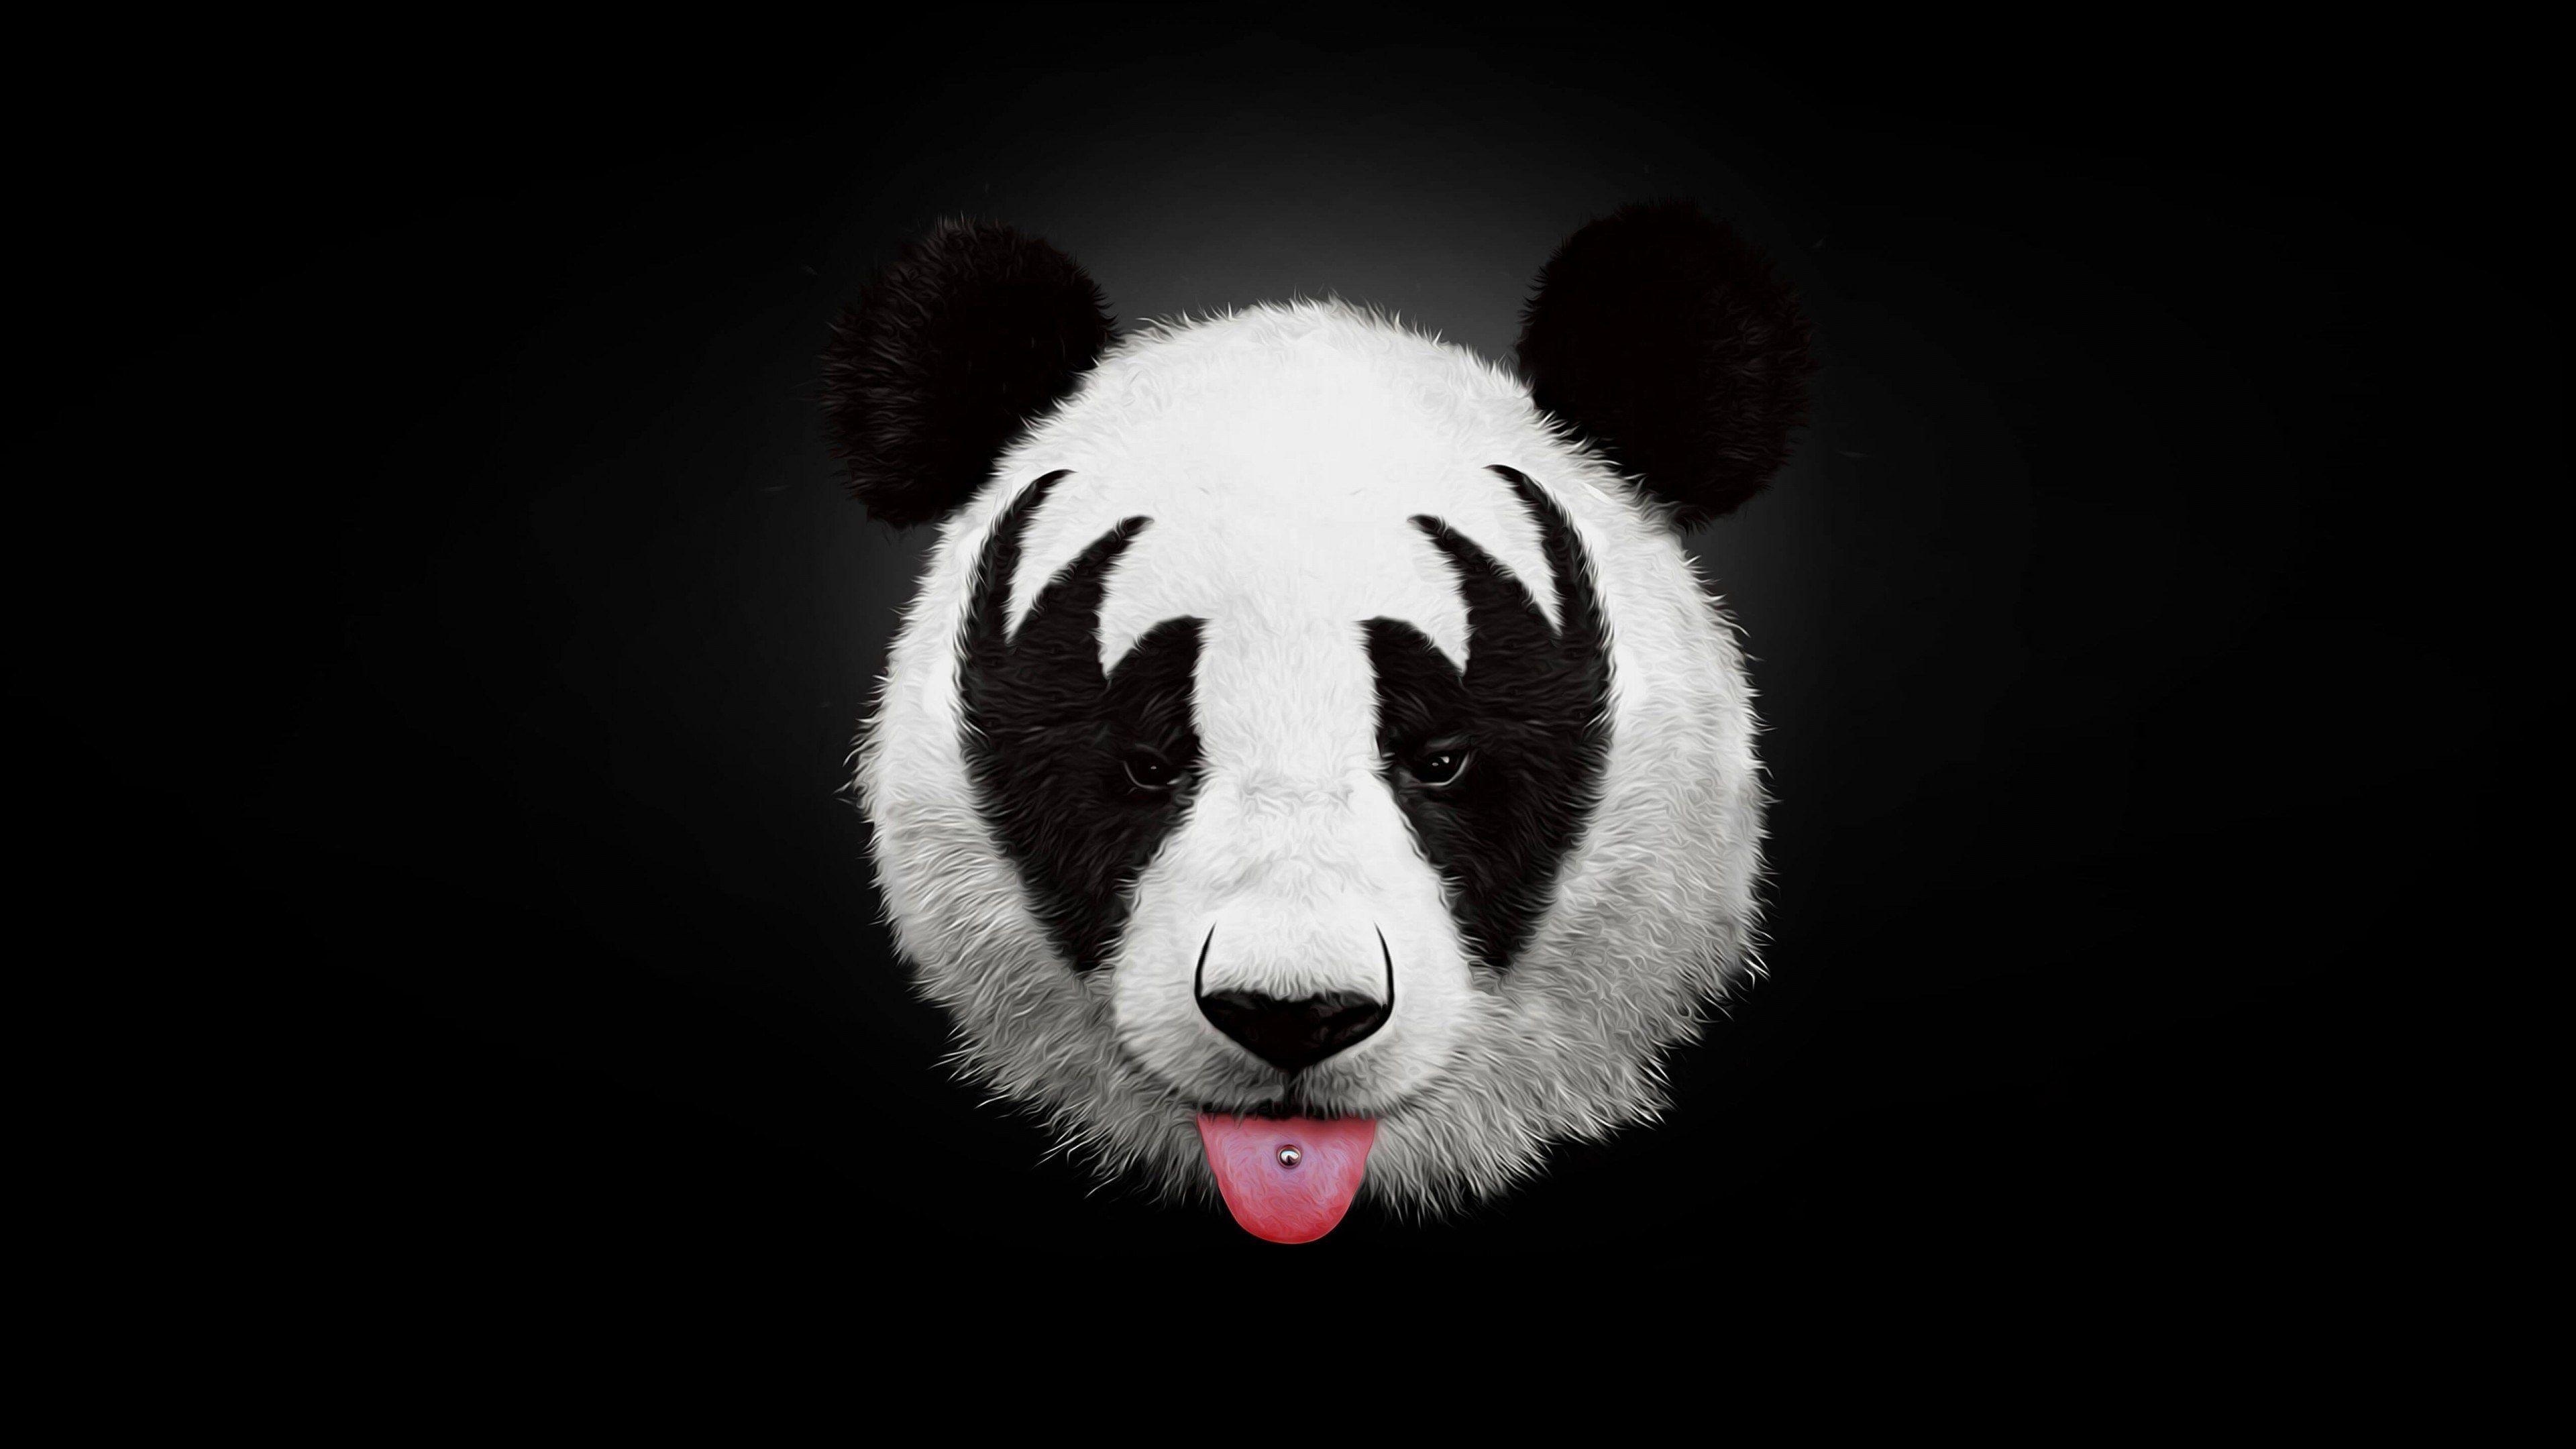 909 Cute Panda Background Stock Video Footage  4K and HD Video Clips   Shutterstock